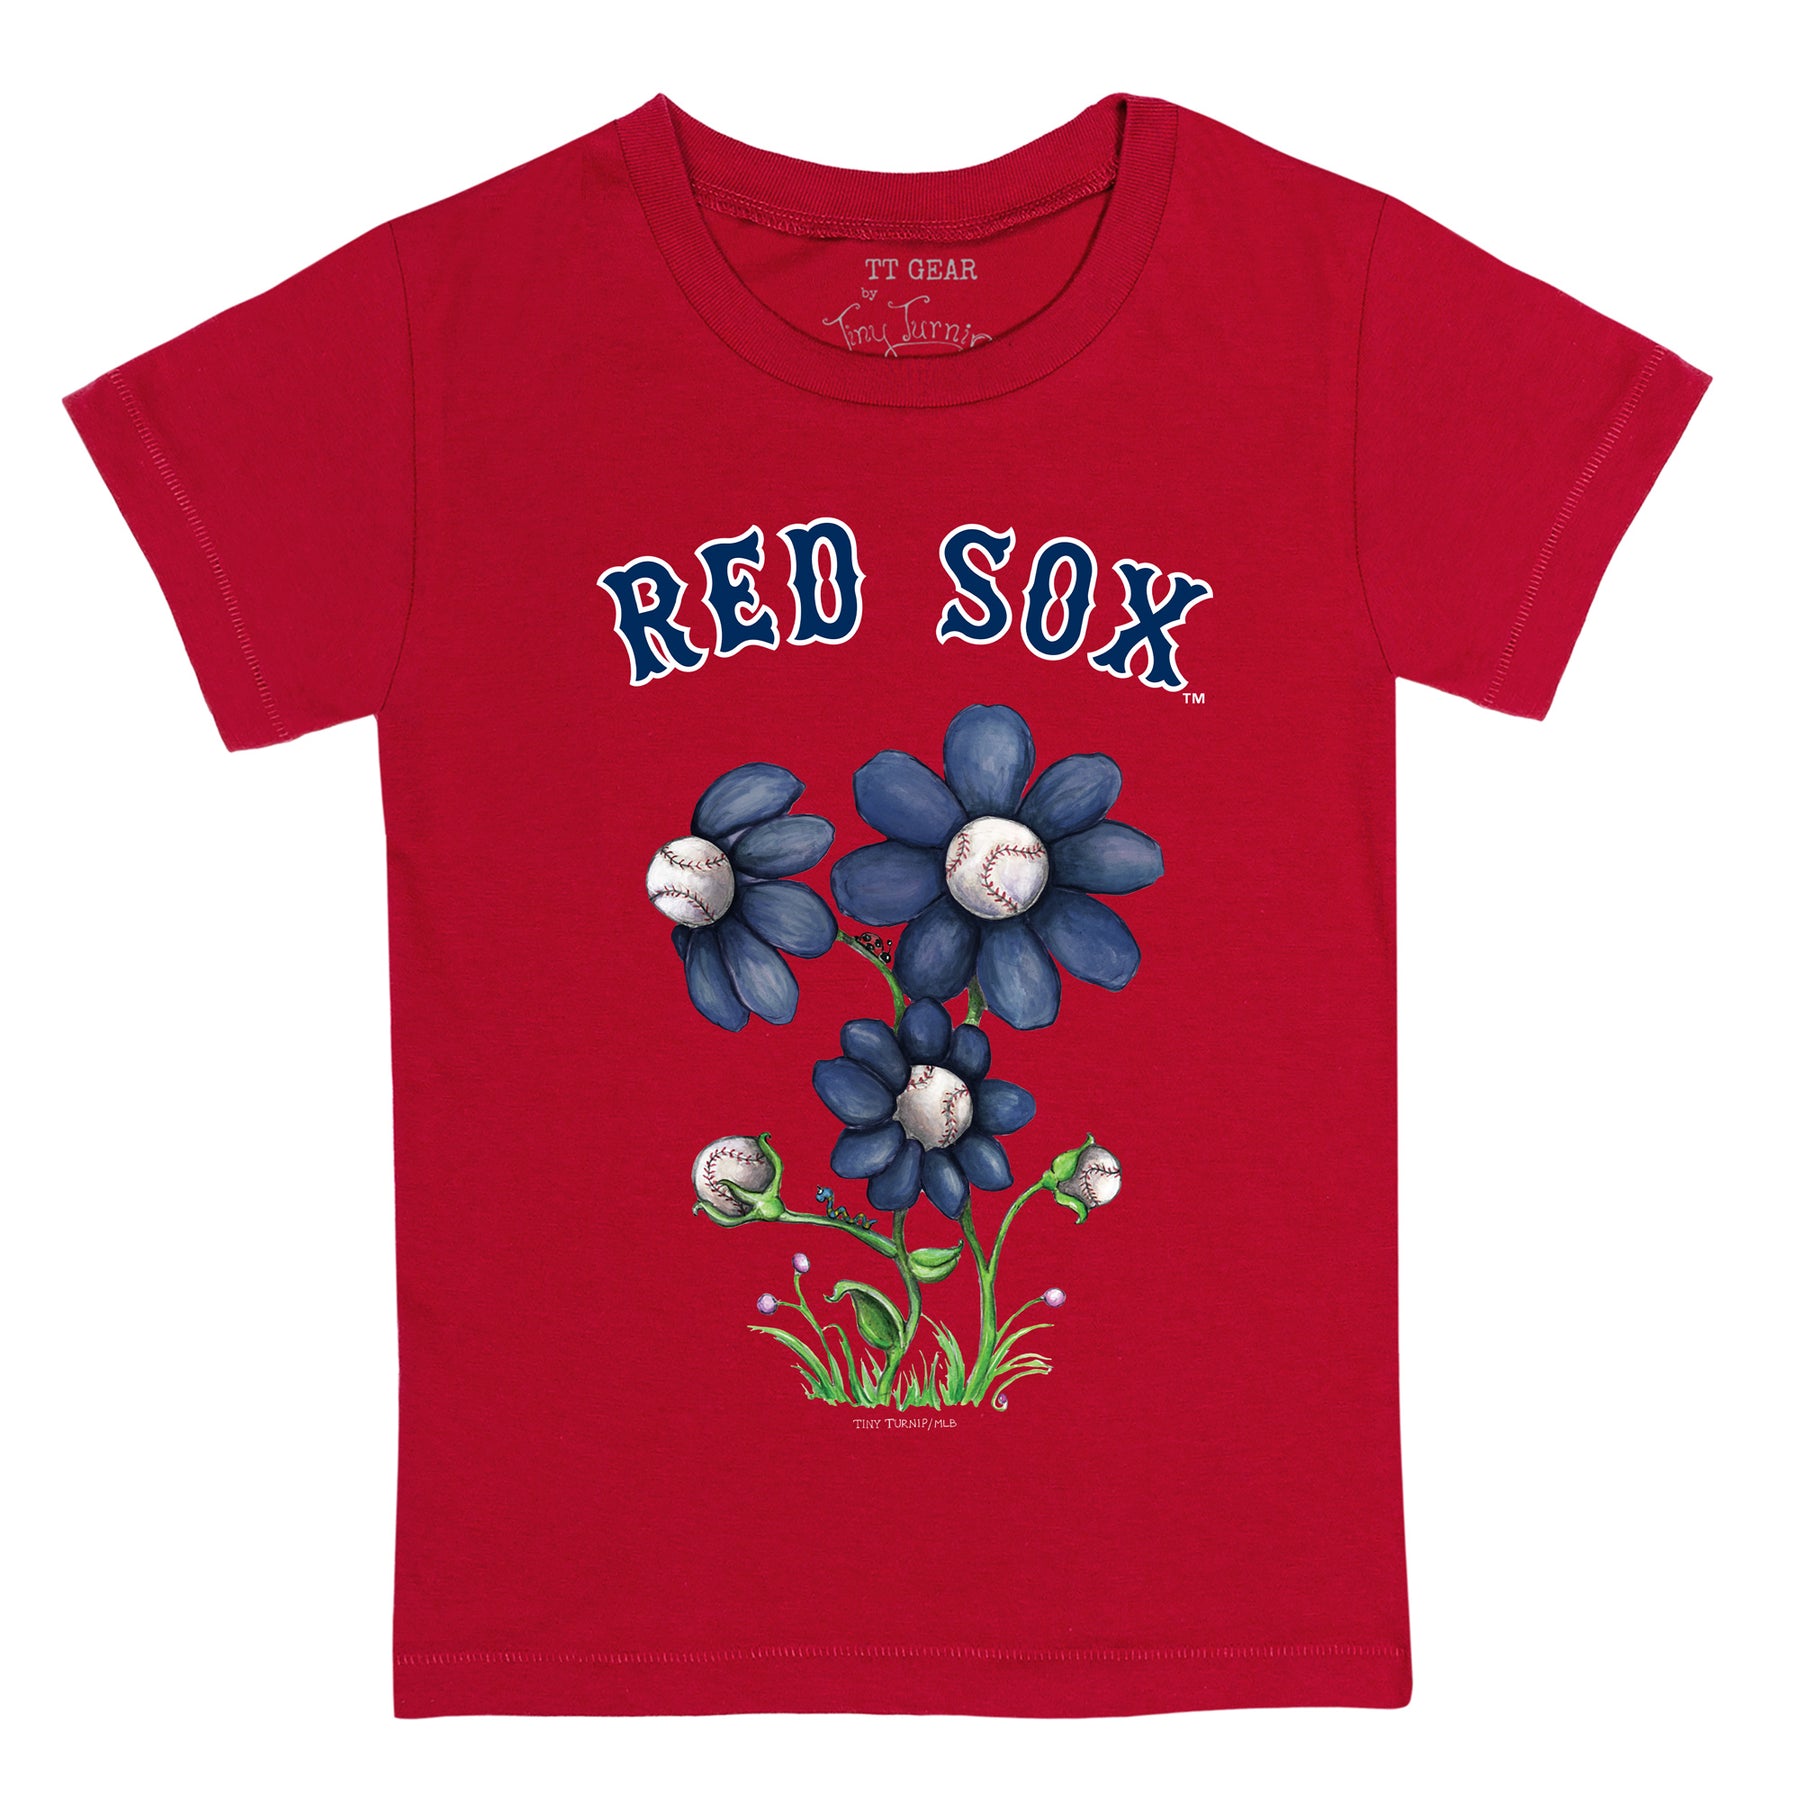 Women's Tiny Turnip White Boston Red Sox Kate The Catcher T-Shirt Size: Extra Small